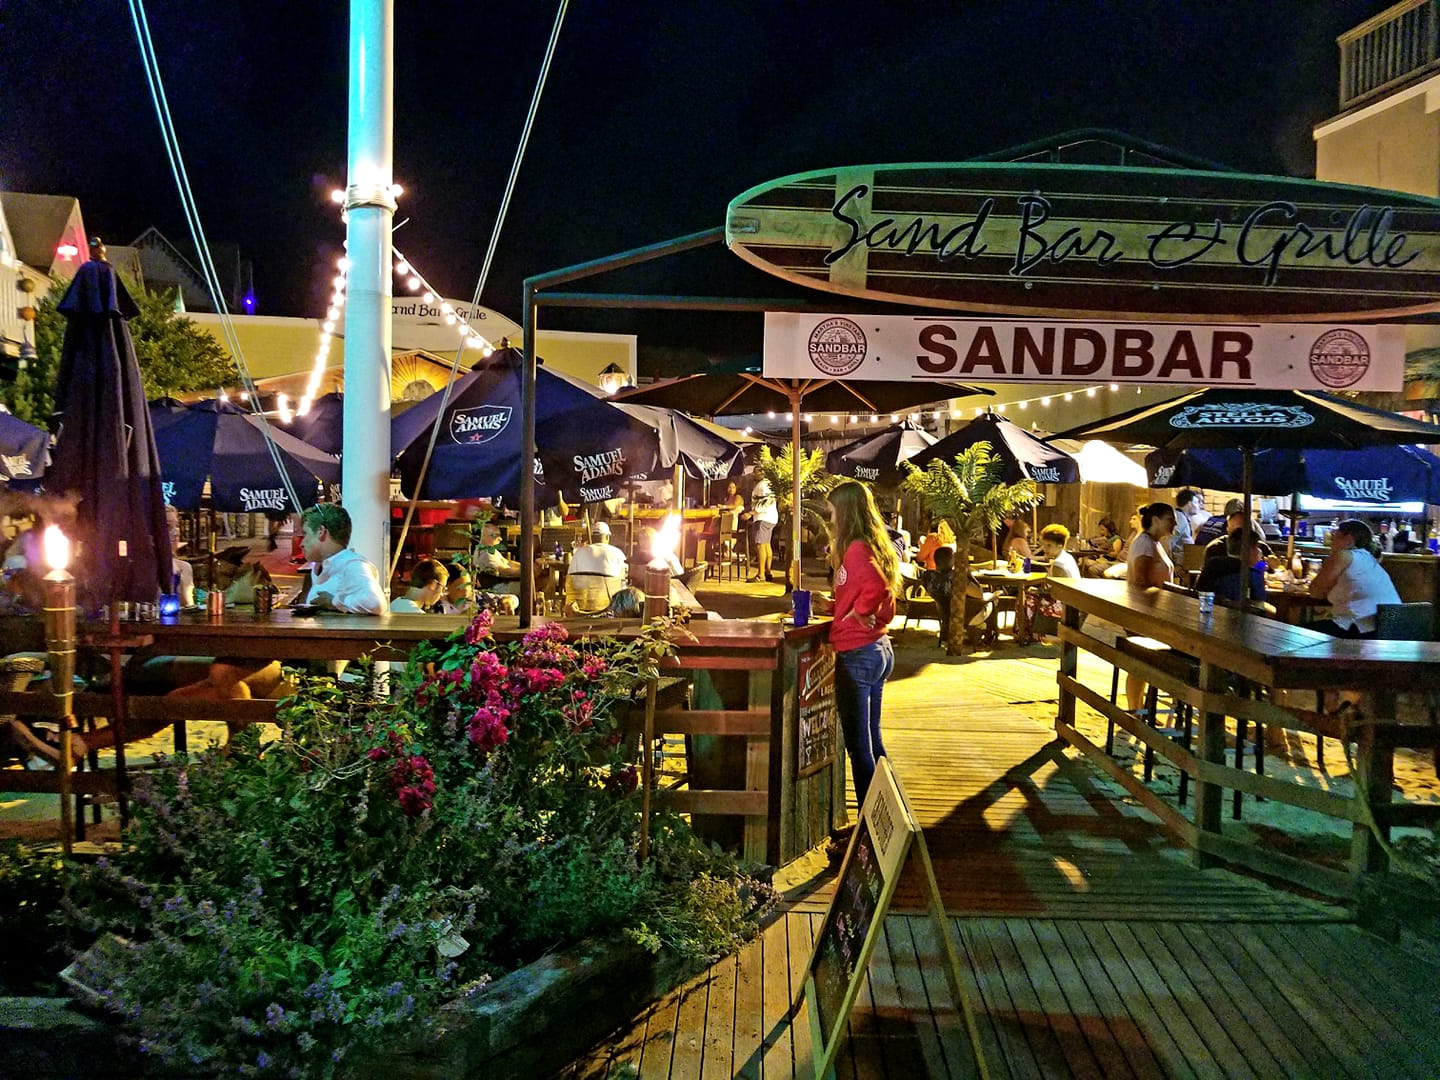 Sand Bar & Grille Where Good Food Meets Good Times This Week on